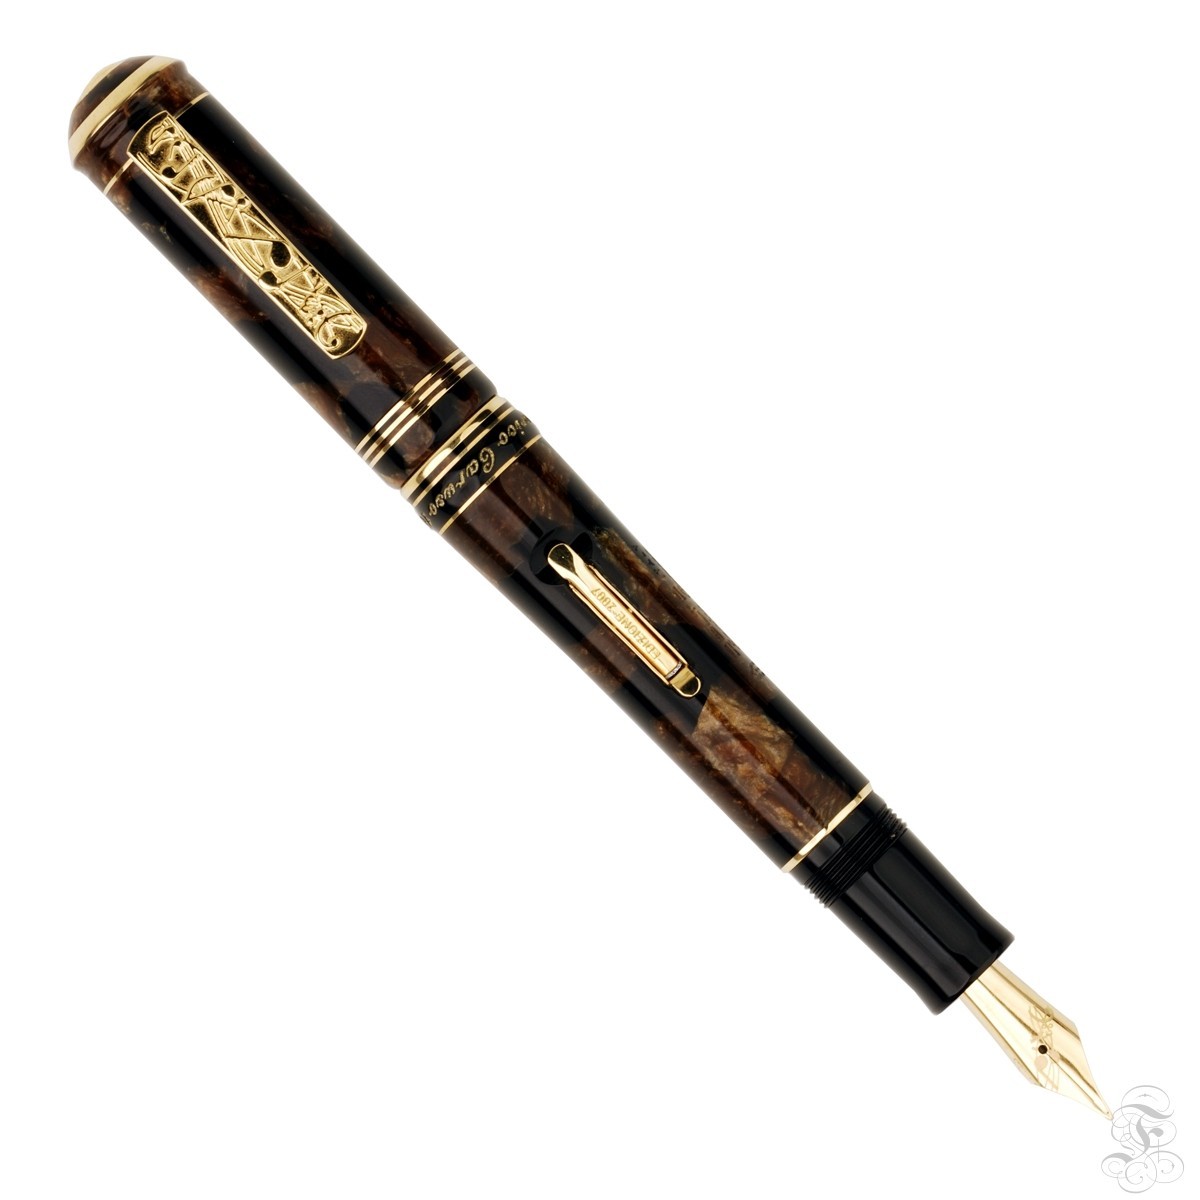 Bút máy Caruso Gold Plated Details, 18K solid gold nib, LE 873